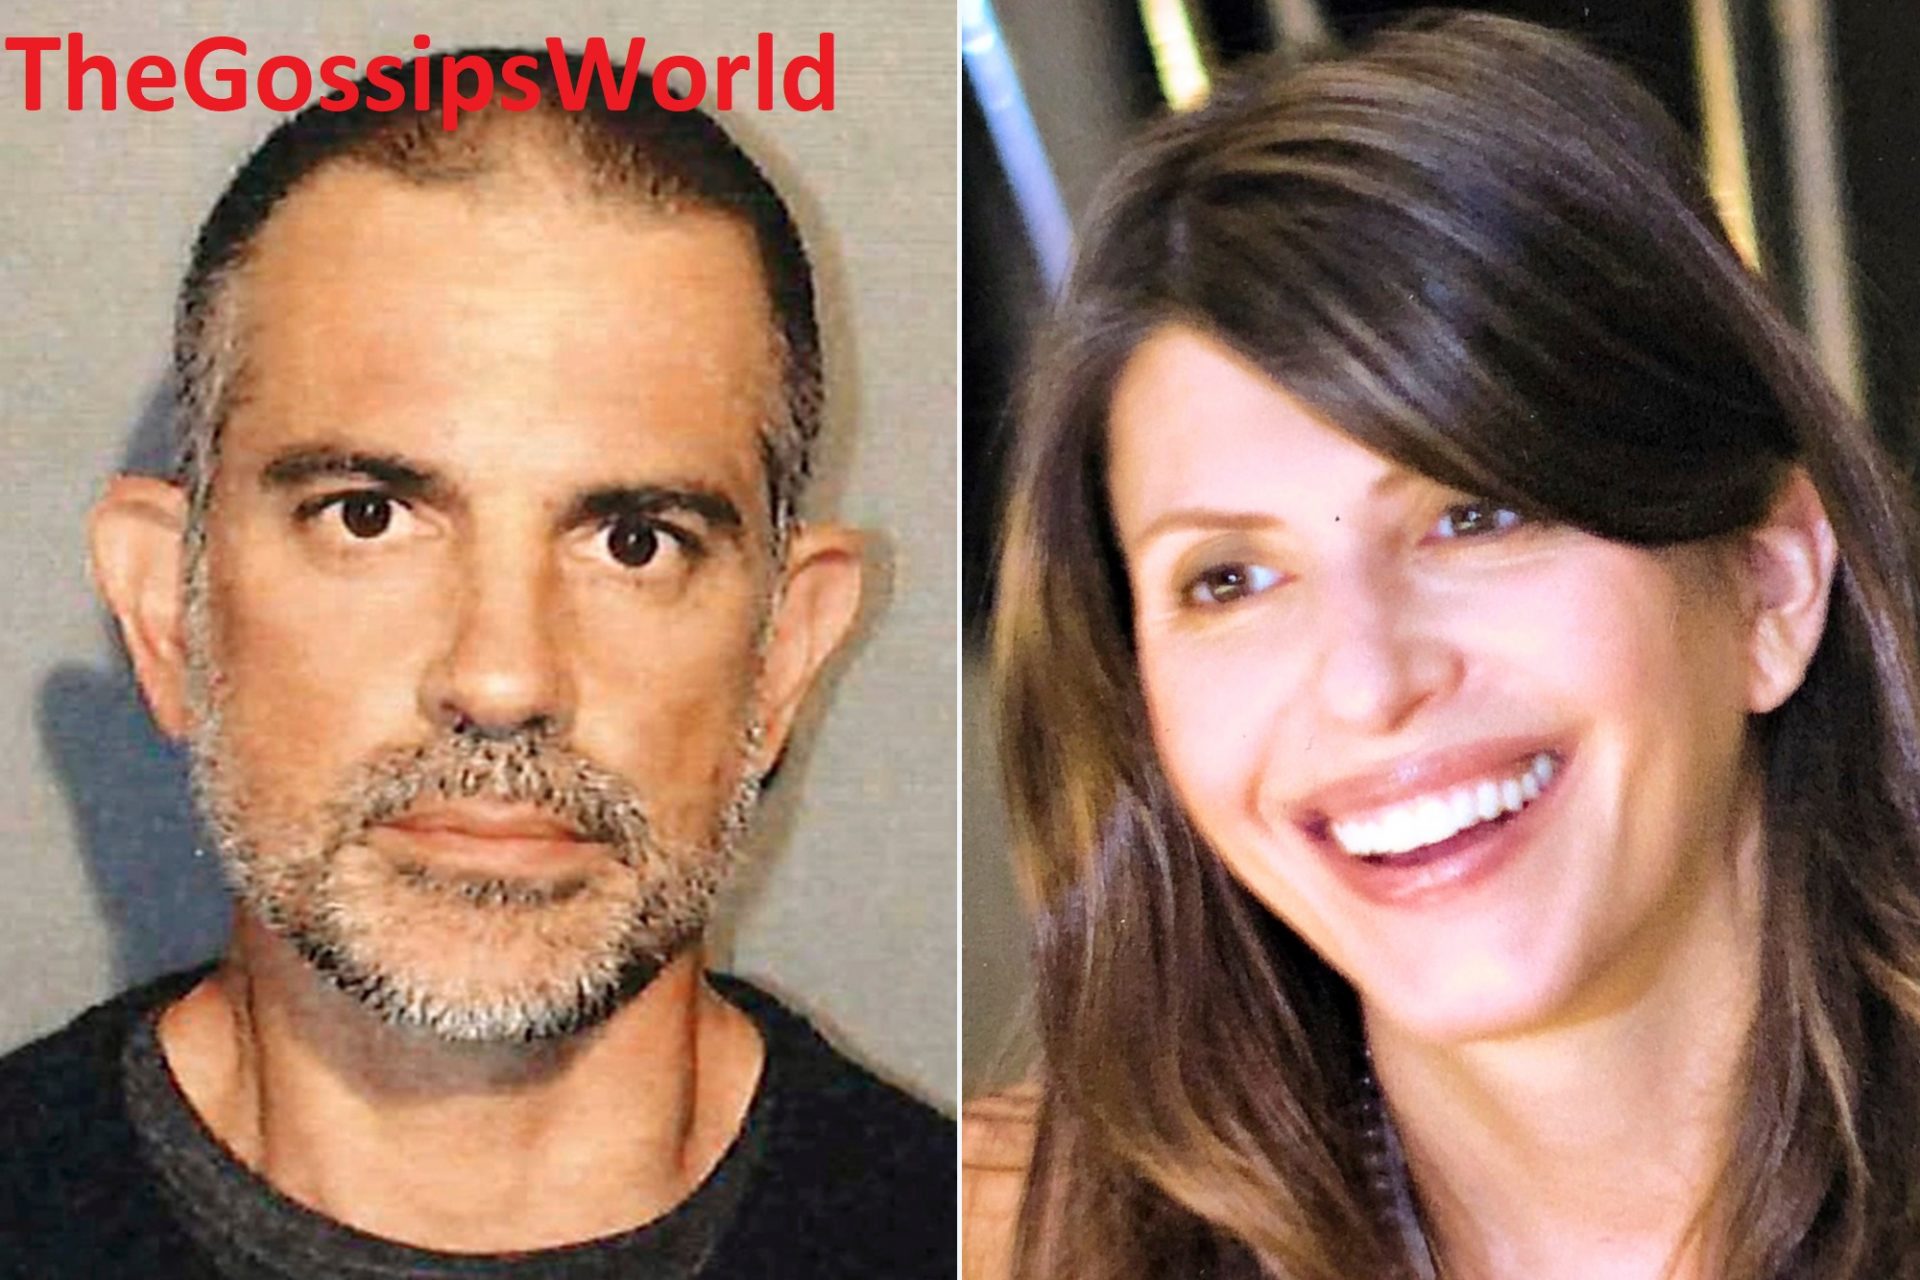 MISSING  Who Was Jennifer Dulos   Cause Of Death  Woman Went Missing  Boyfriend Name   Family  - 64